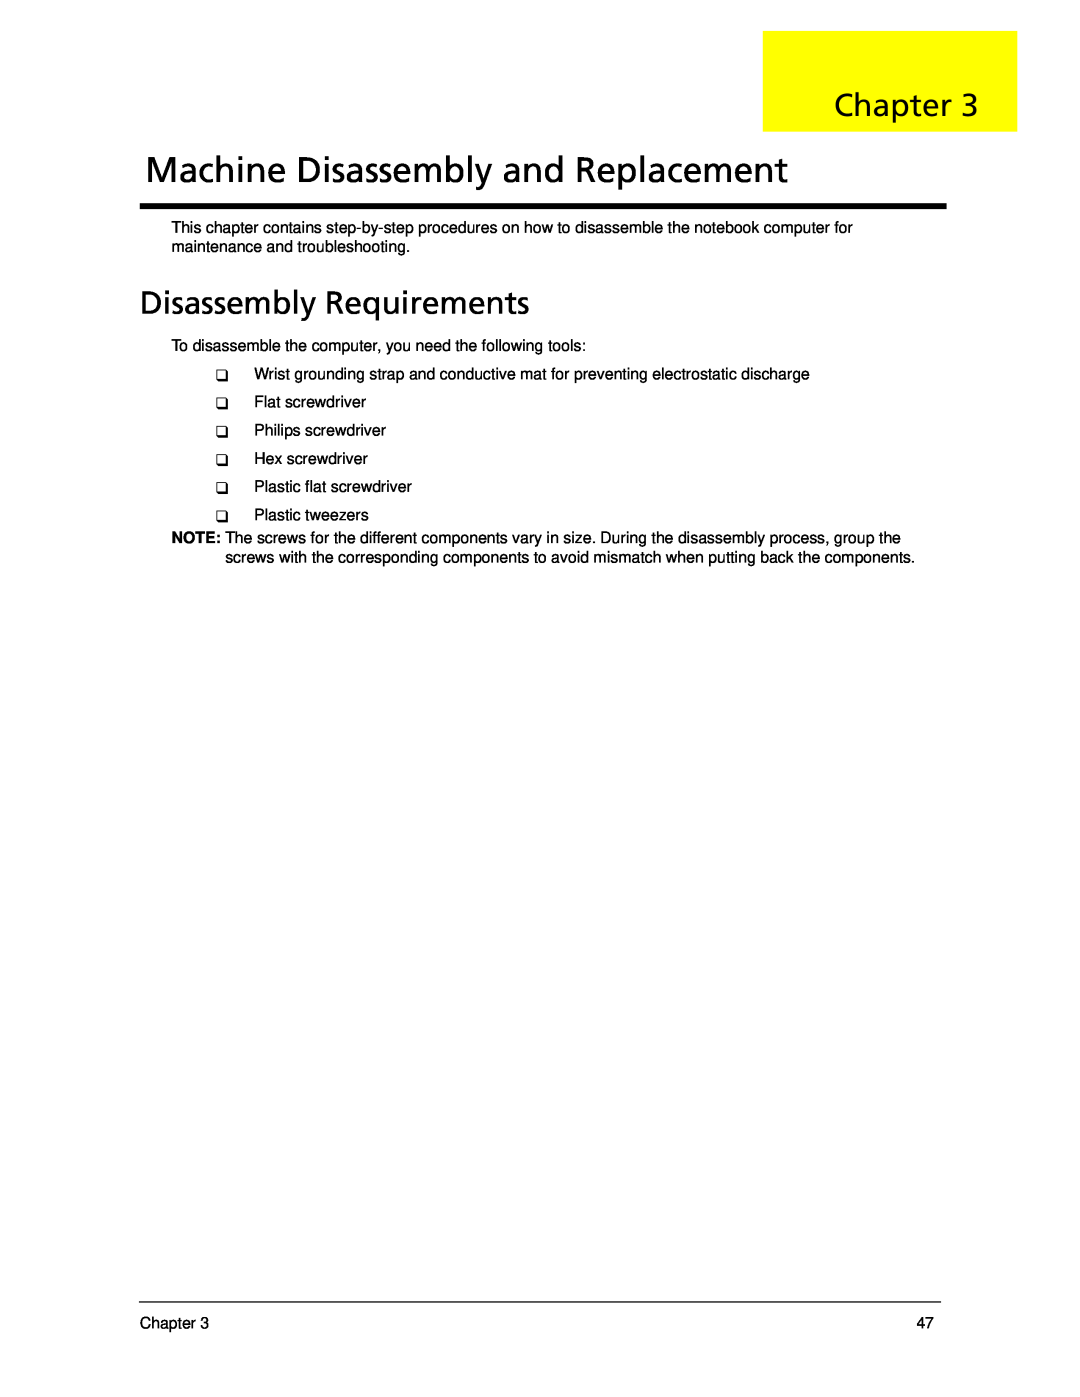 Acer 5330 manual Machine Disassembly and Replacement, Disassembly Requirements, Chapter 